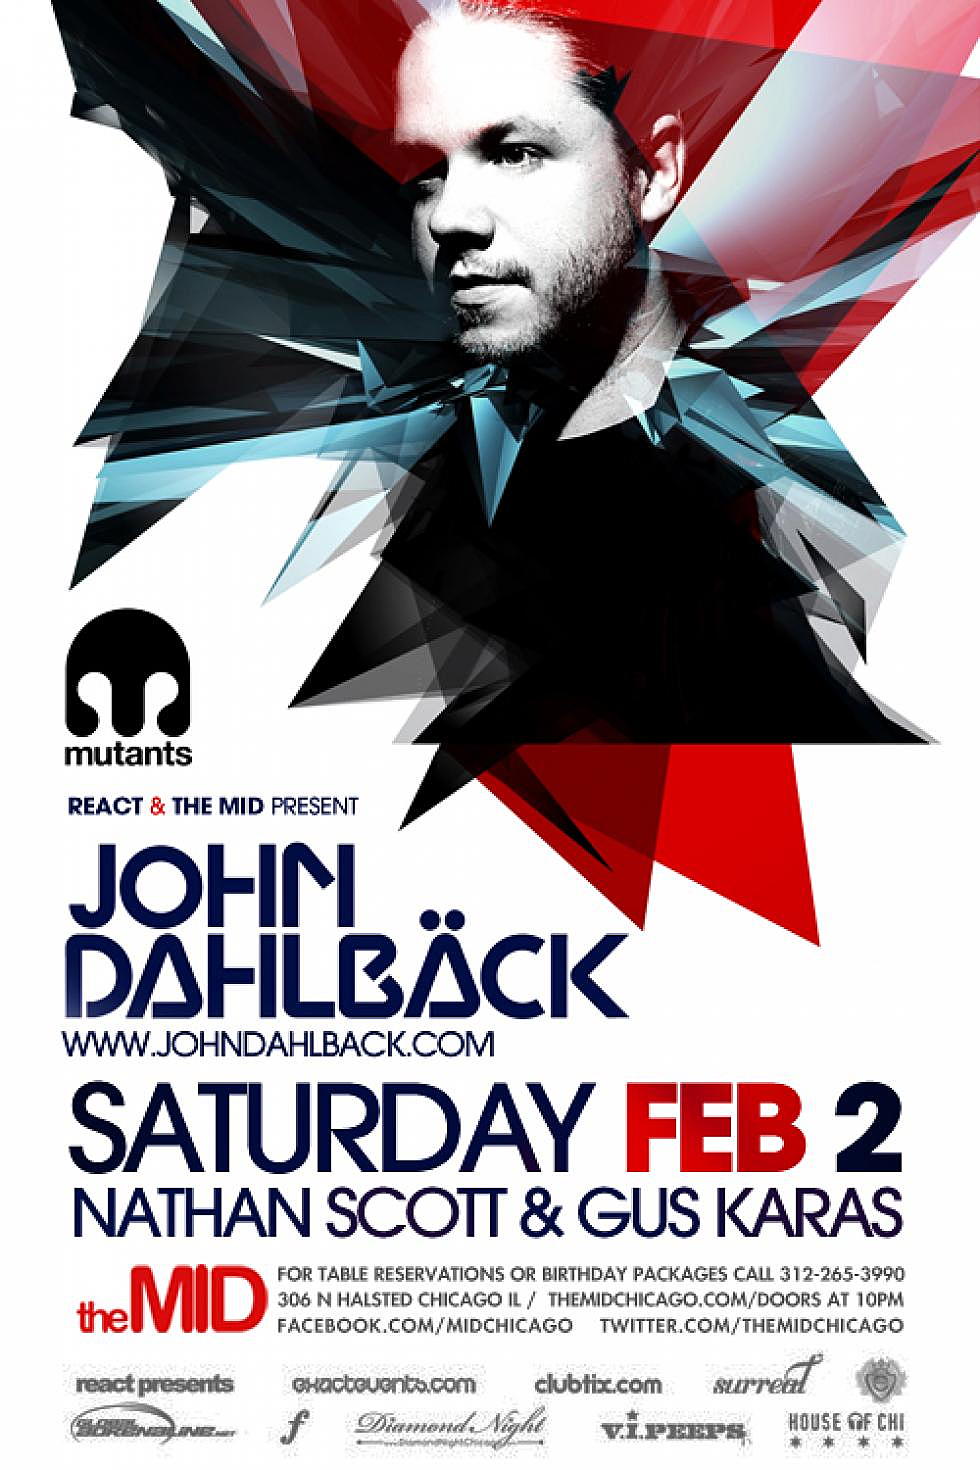 React Presents welcomes John Dahlback at The Mid February 2nd